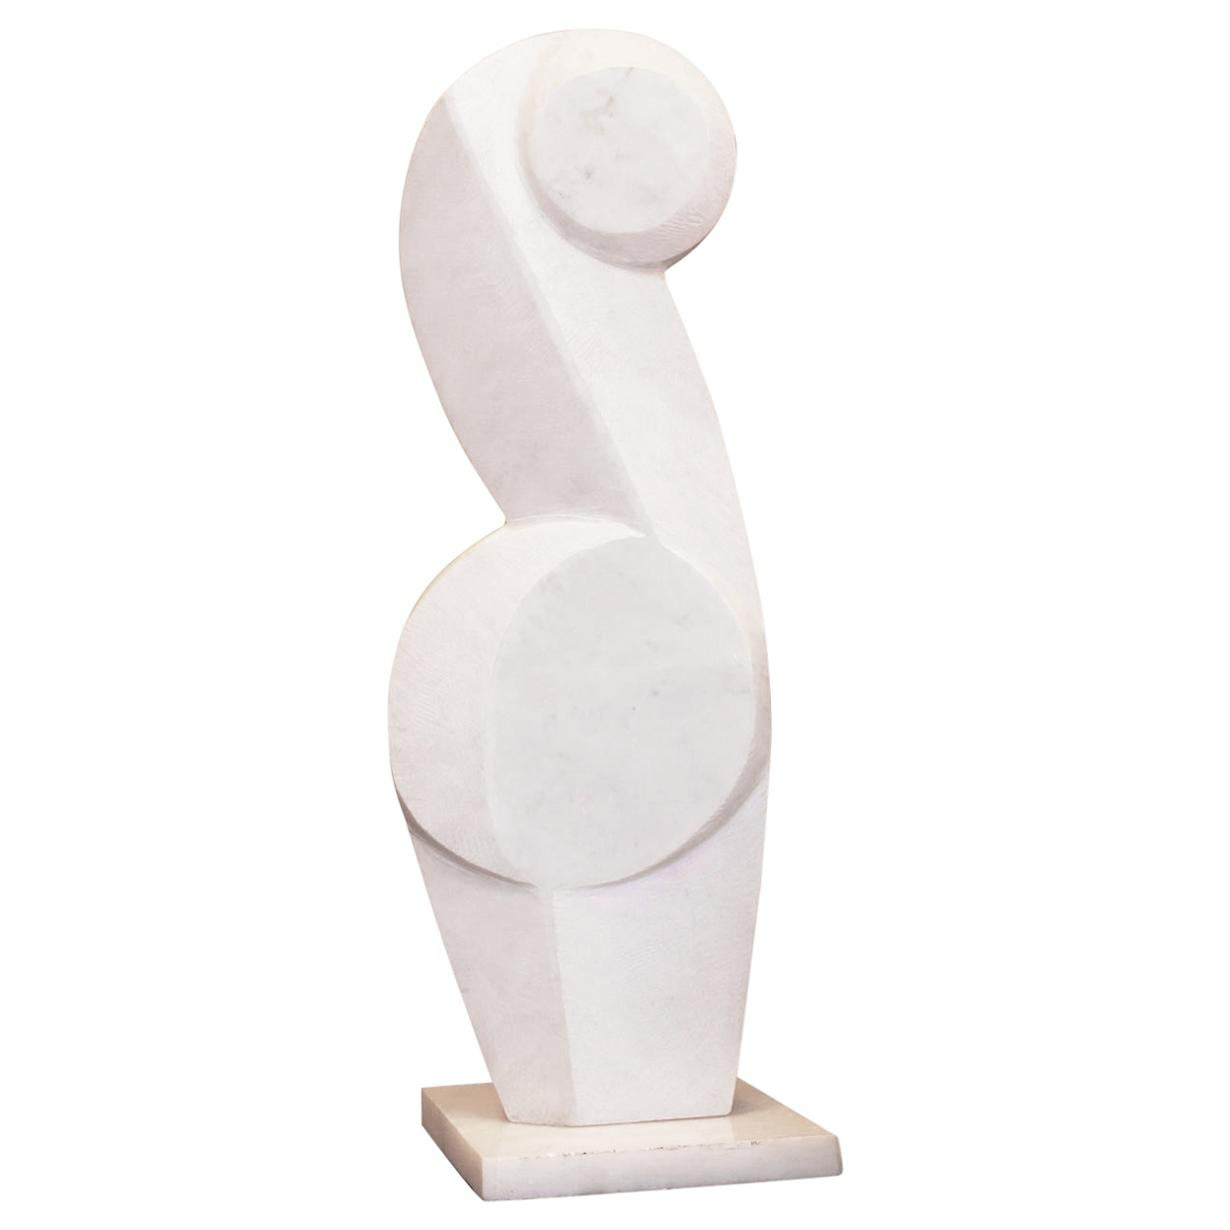 Sumptuous Hand Carved Marble Sculpture by "Savy", France 2010, One-of-a-Kind For Sale